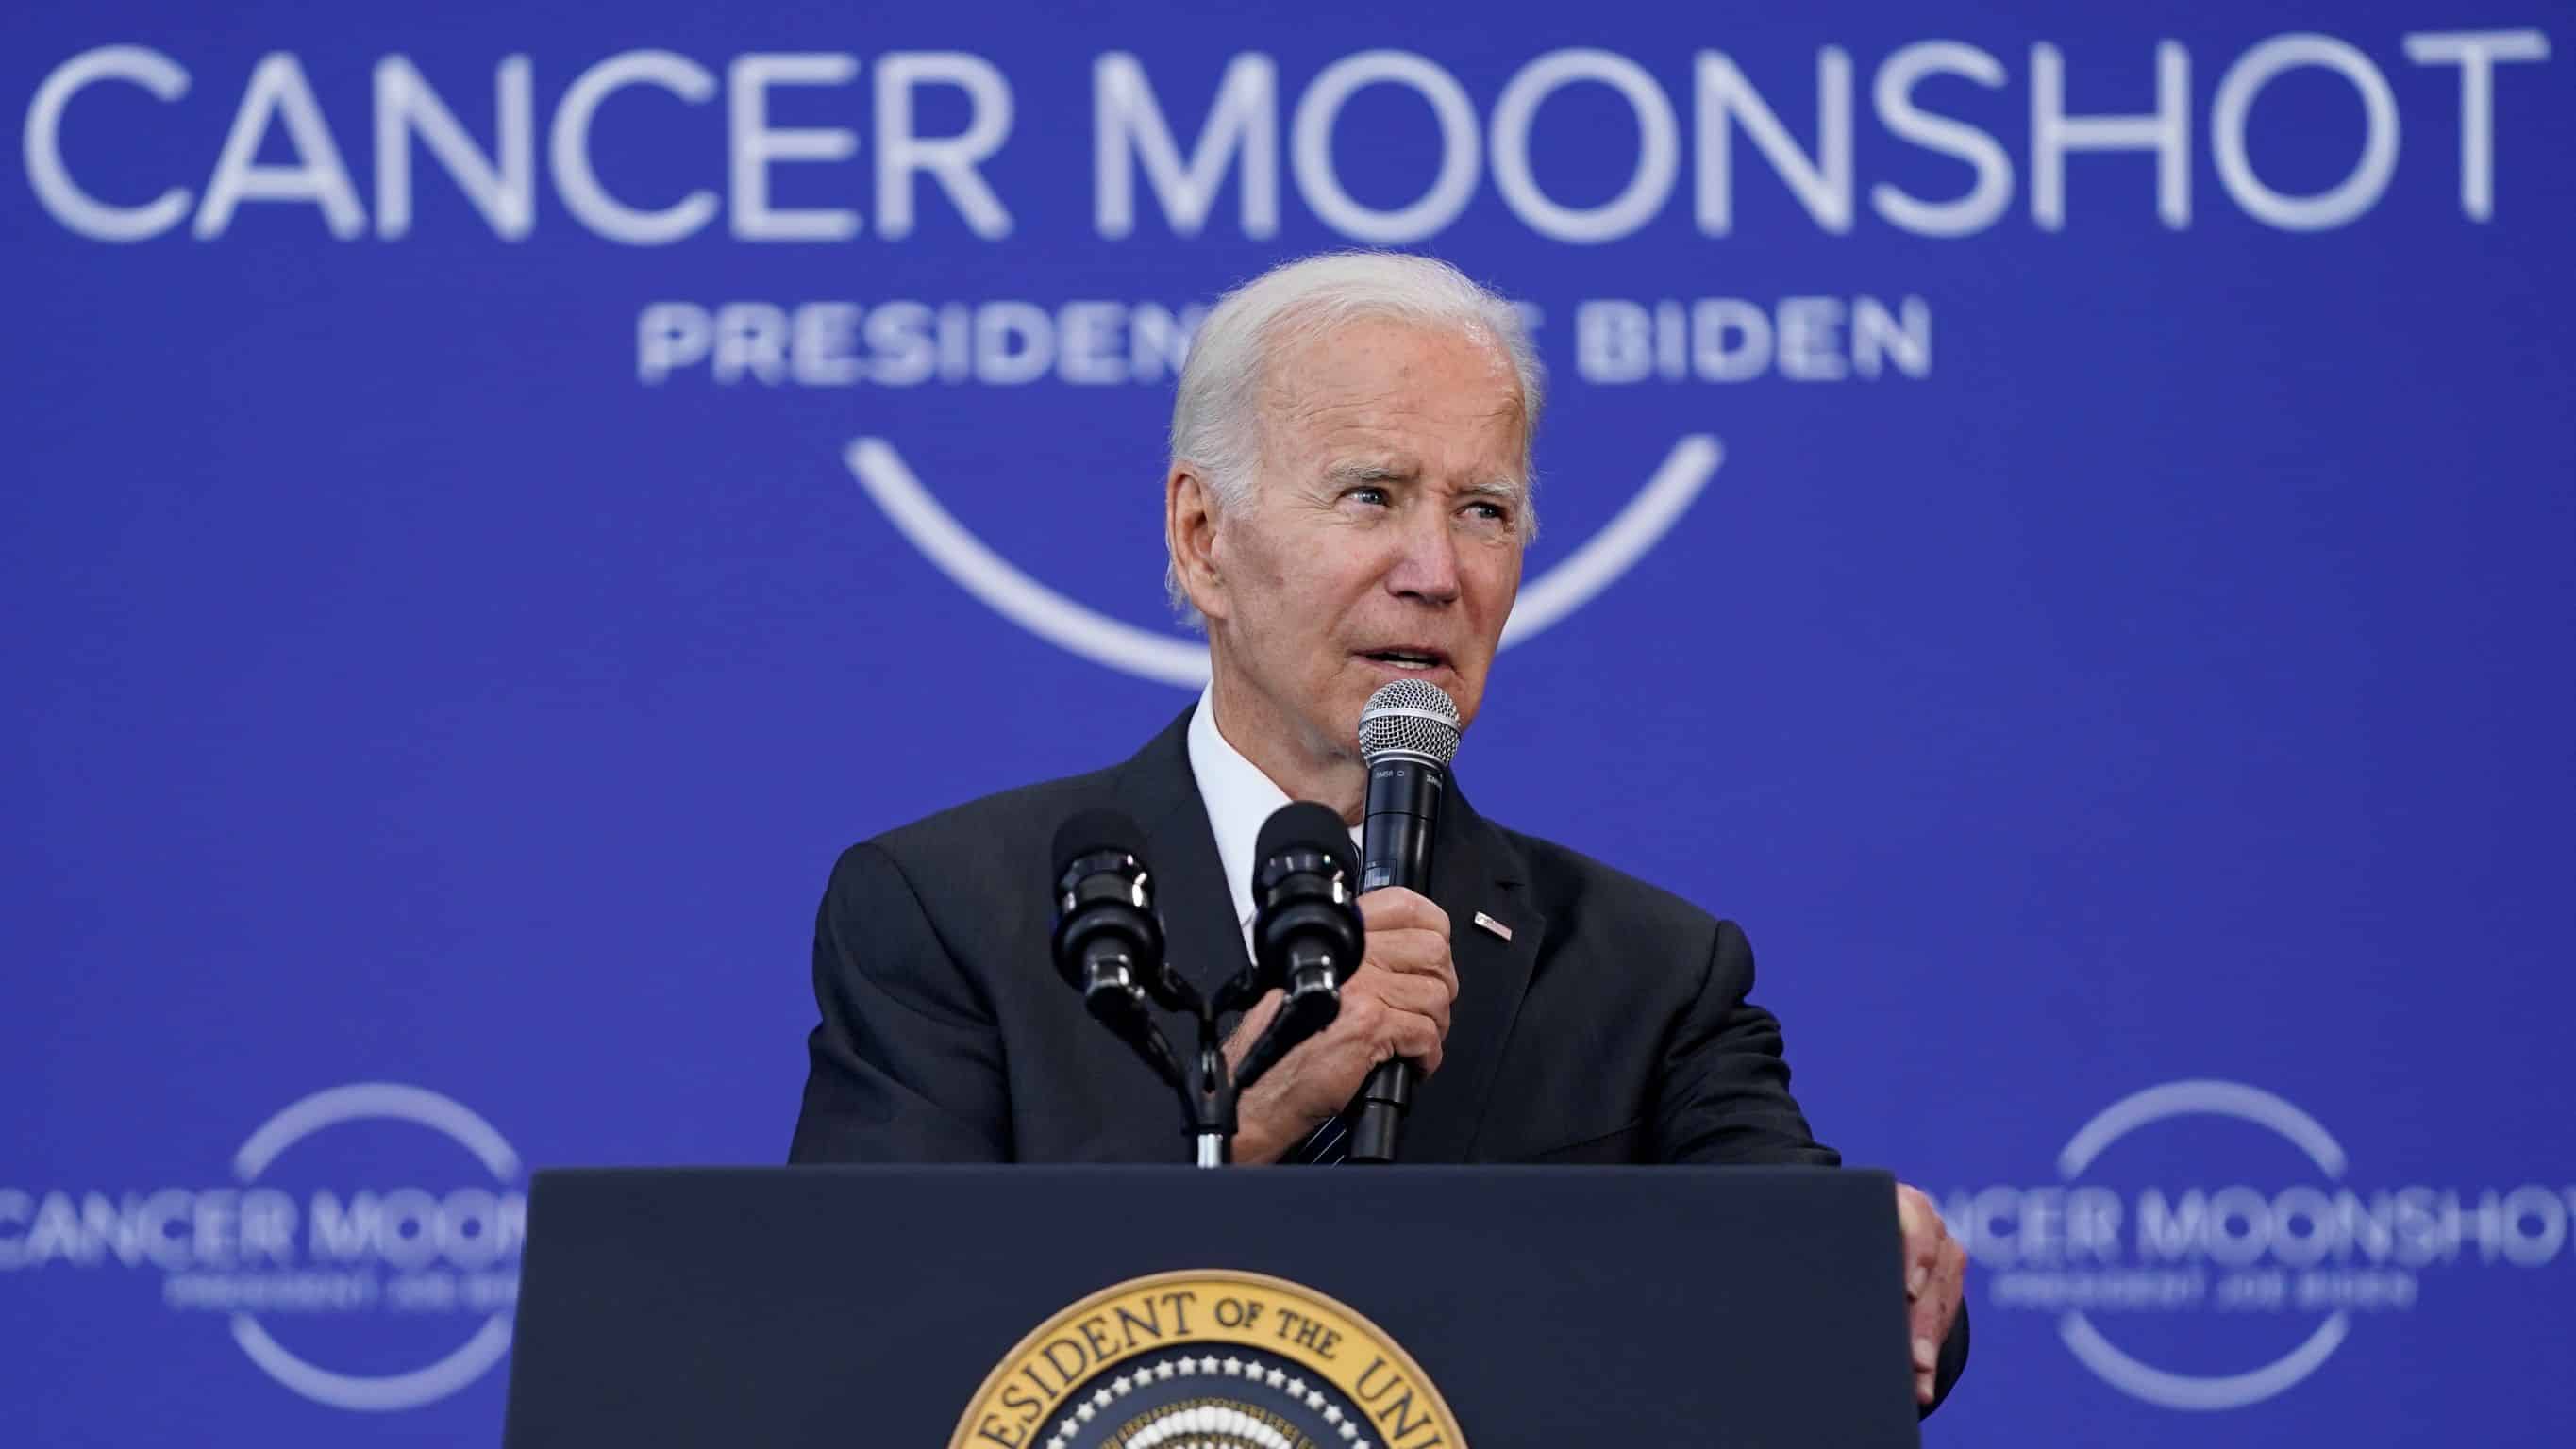 Biden Urges Americans to Come Together for Cancer Fight